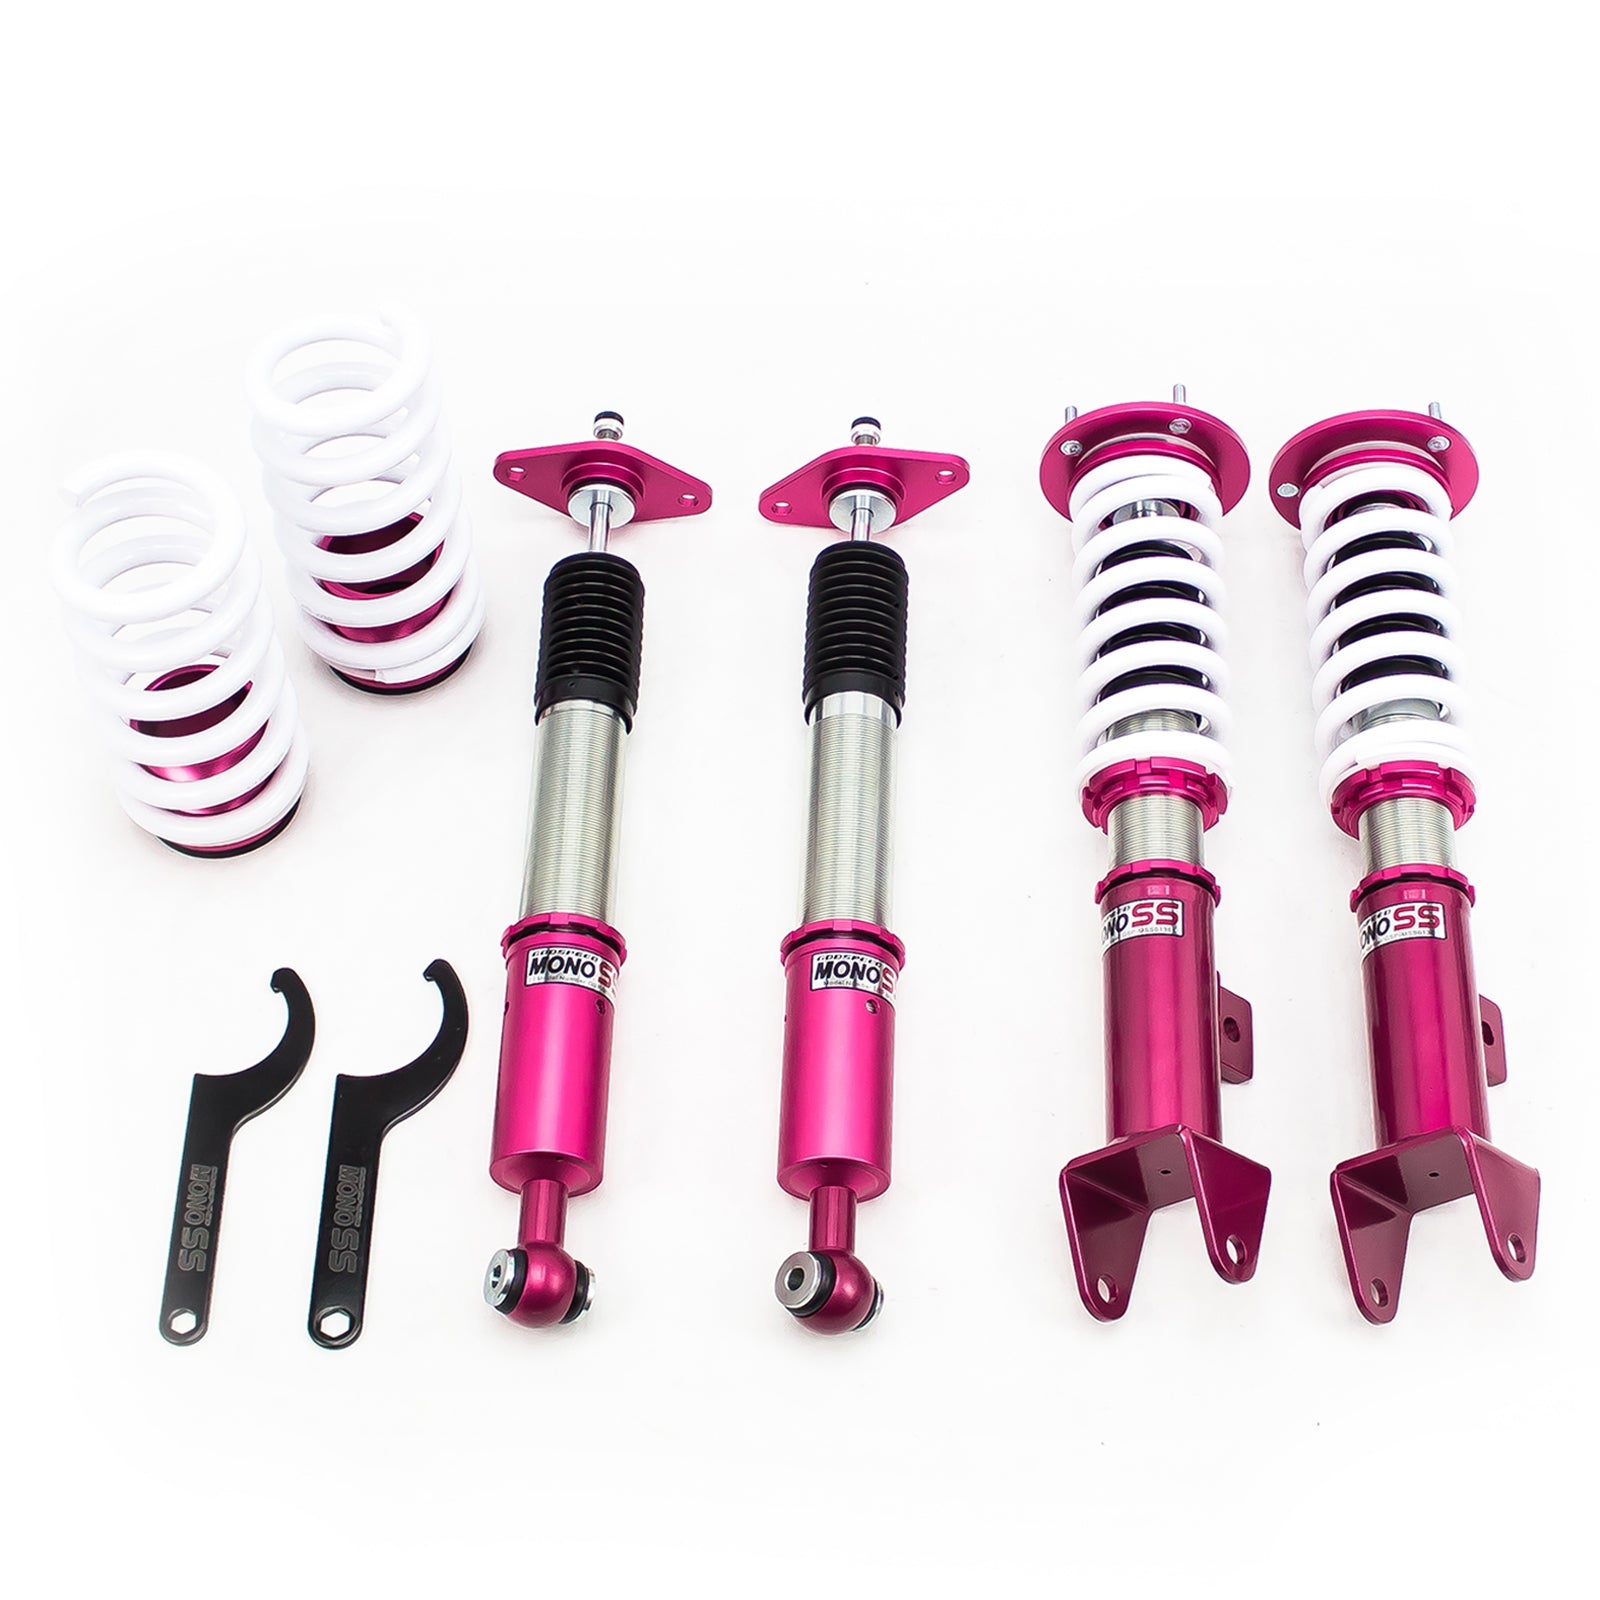 Godspeed MSS0136-C MonoSS Coilover Lowering Kit, Fully Adjustable, Ride Height, Spring Tension And 16 Click Damping, Dodge Challenger(RWD) 2011-17